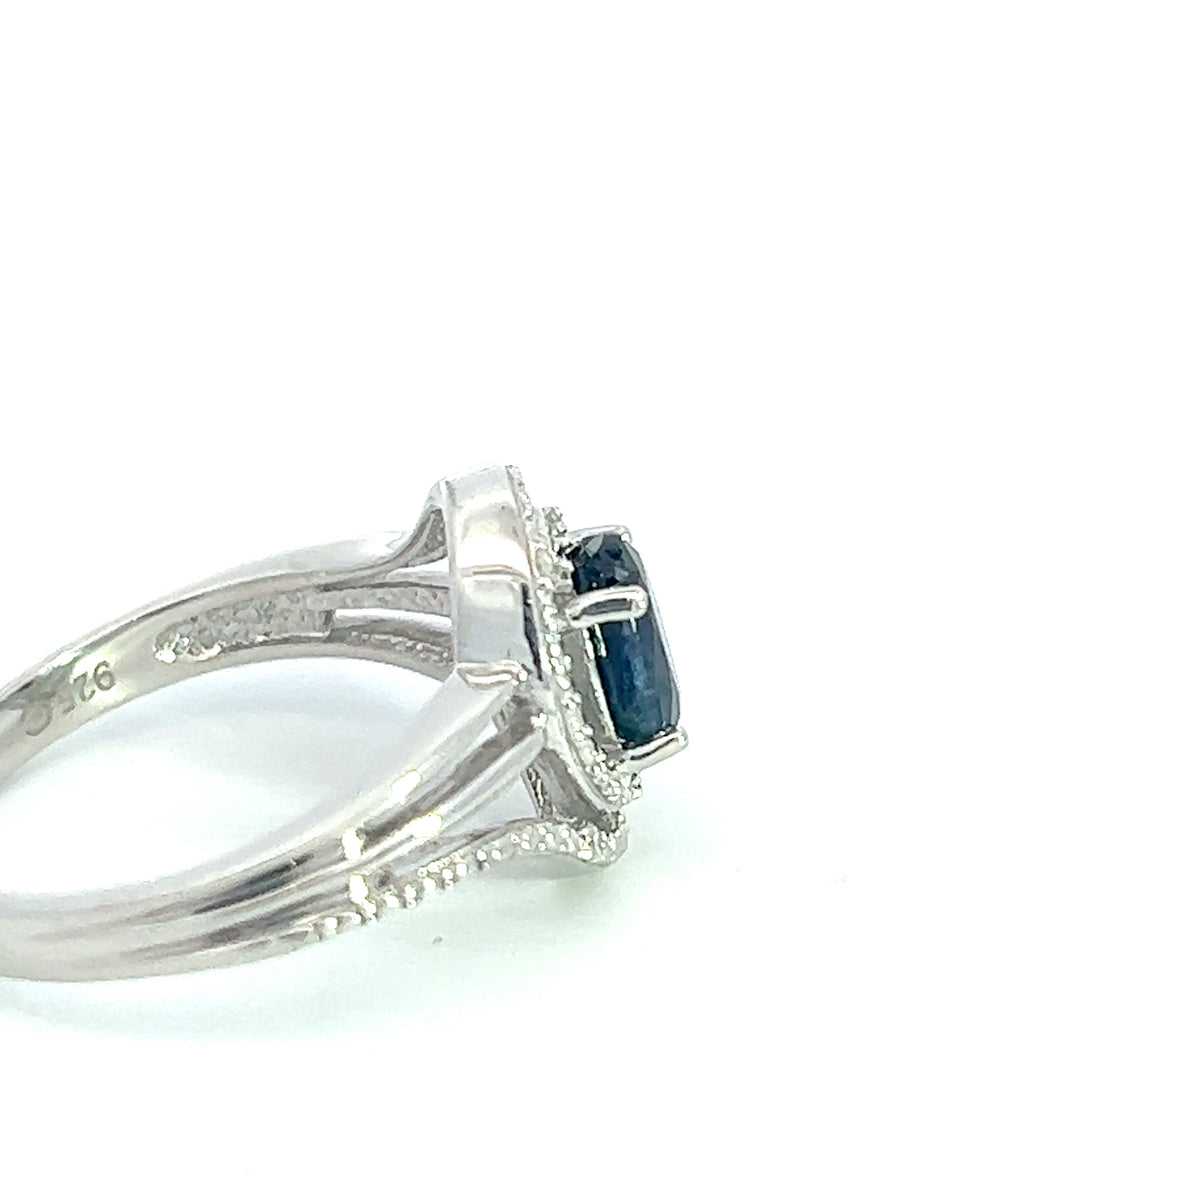 925 Sterling Silver 7 x 5mm Blue Sapphire and 0.03cttw Diamond Ring - Size 6